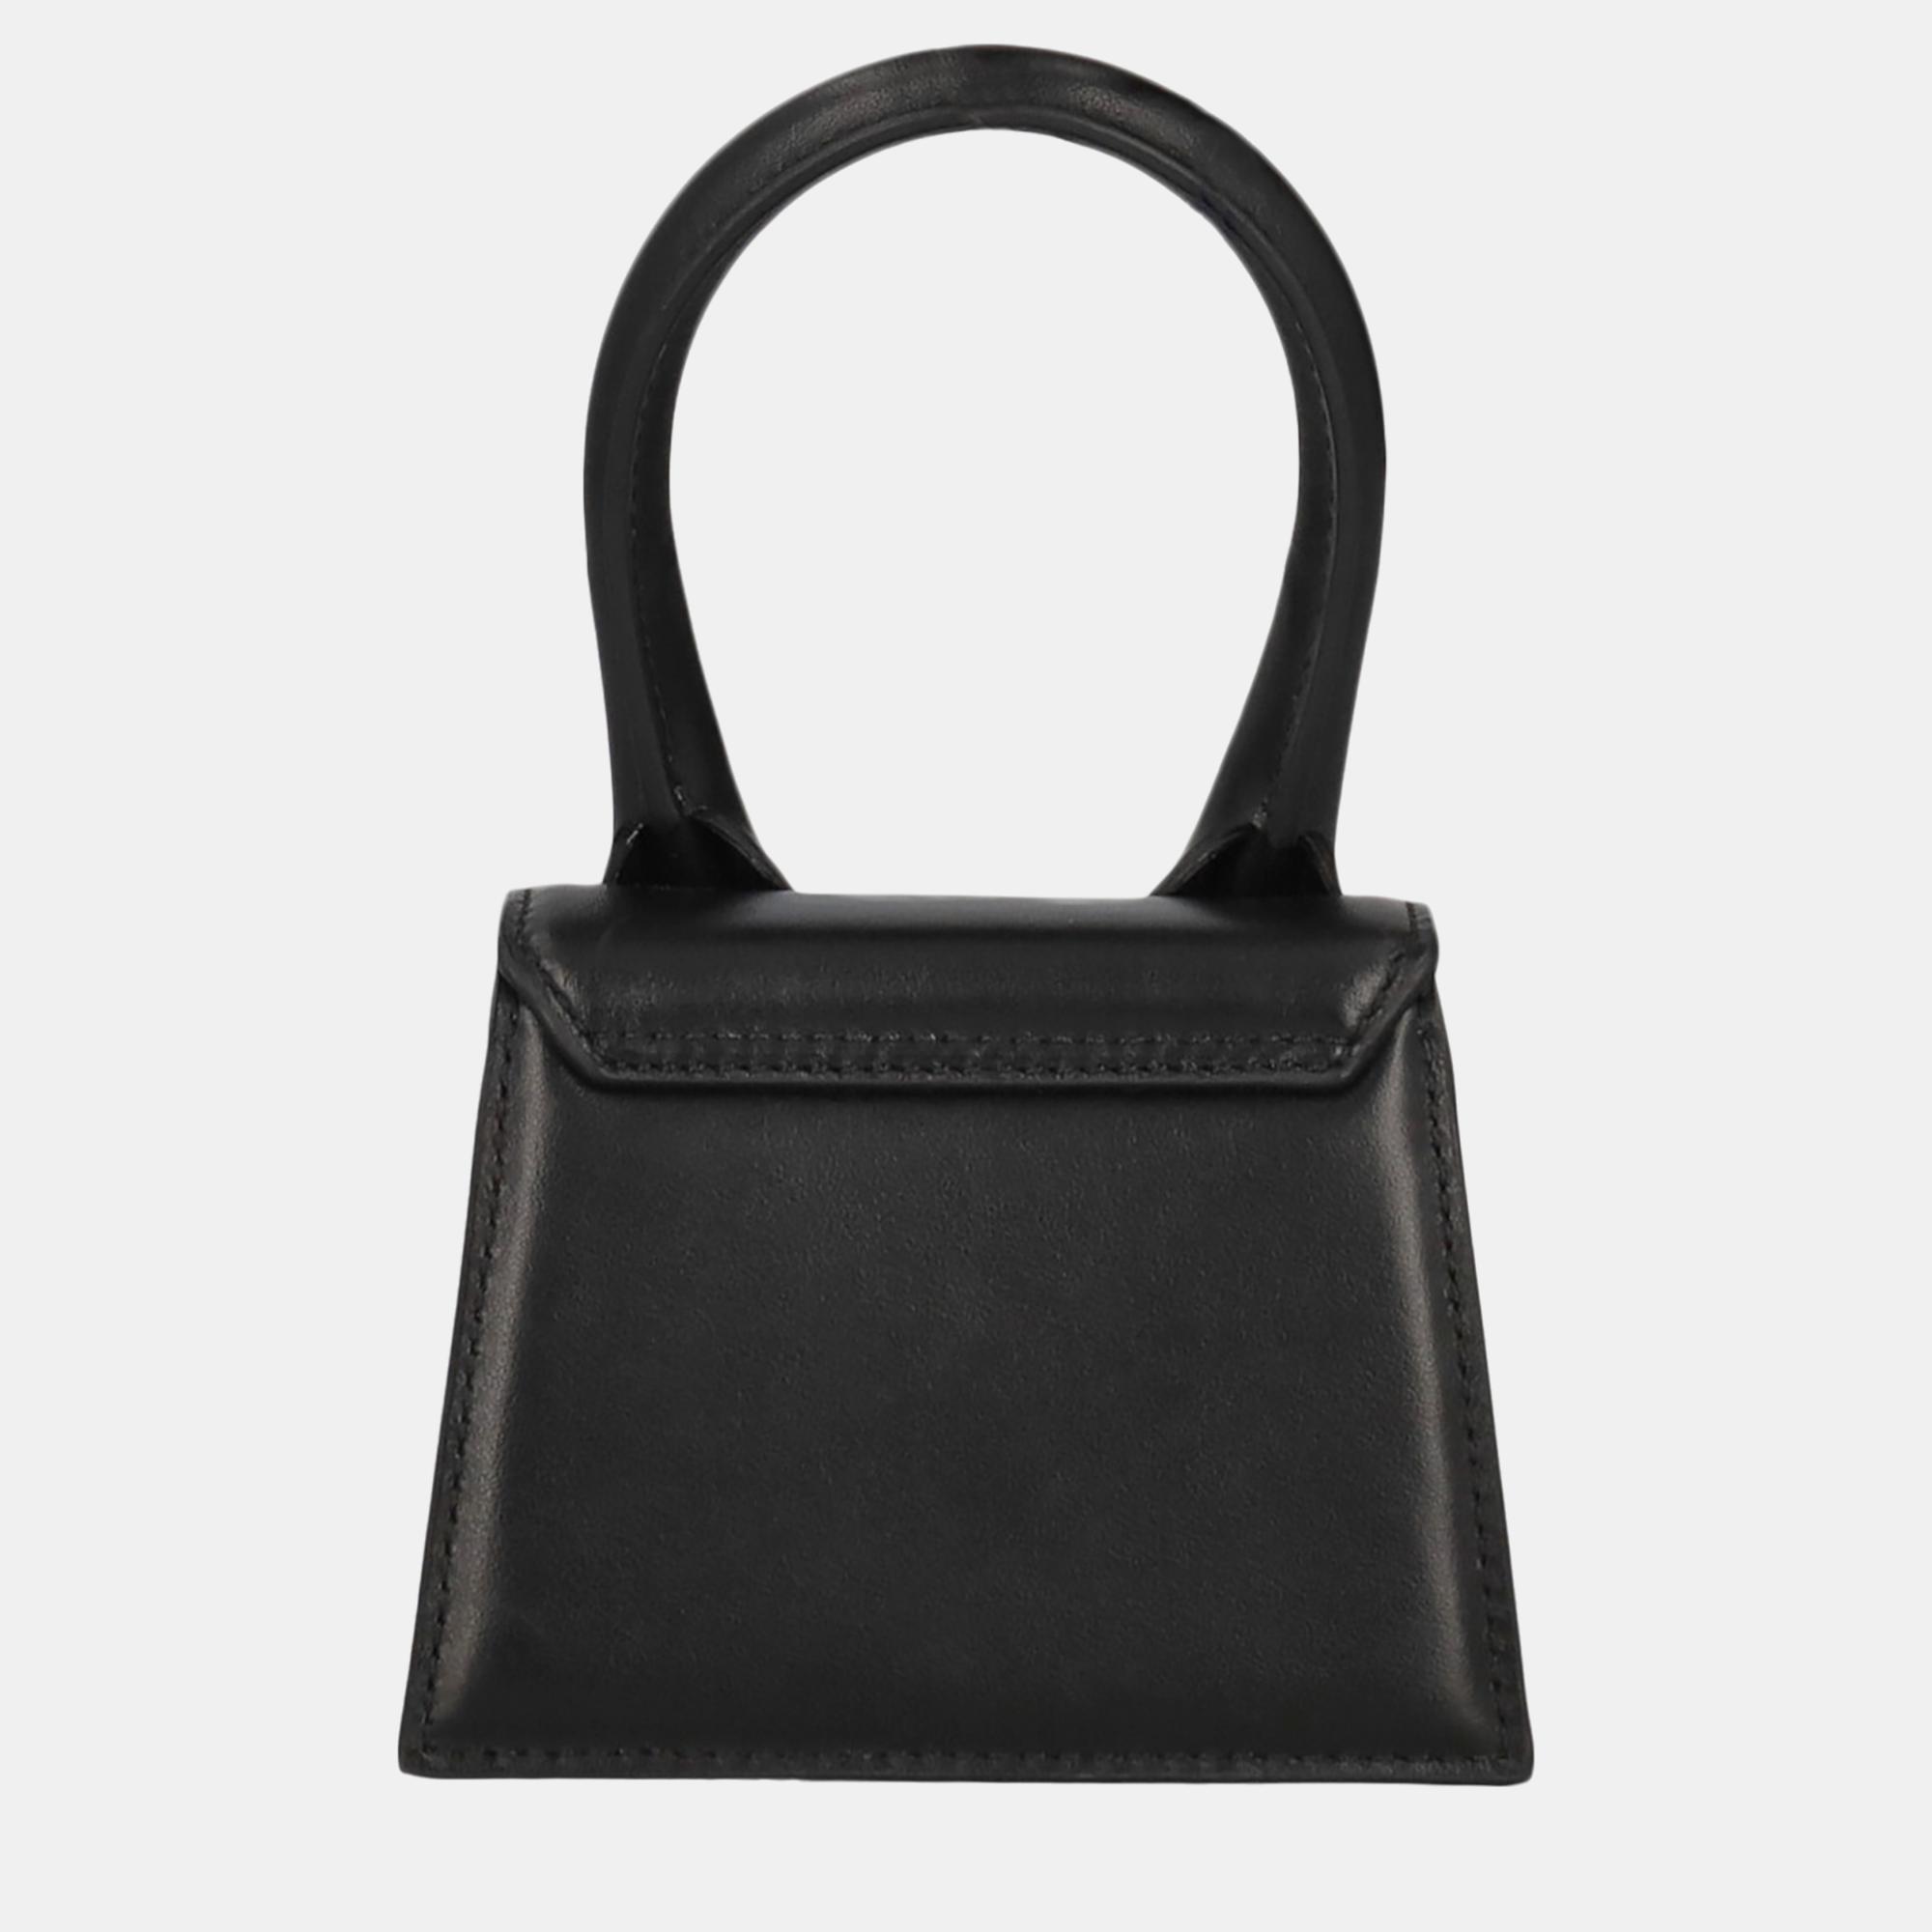 Jacquemus Women's Leather Cross Body Bag - Black - One Size